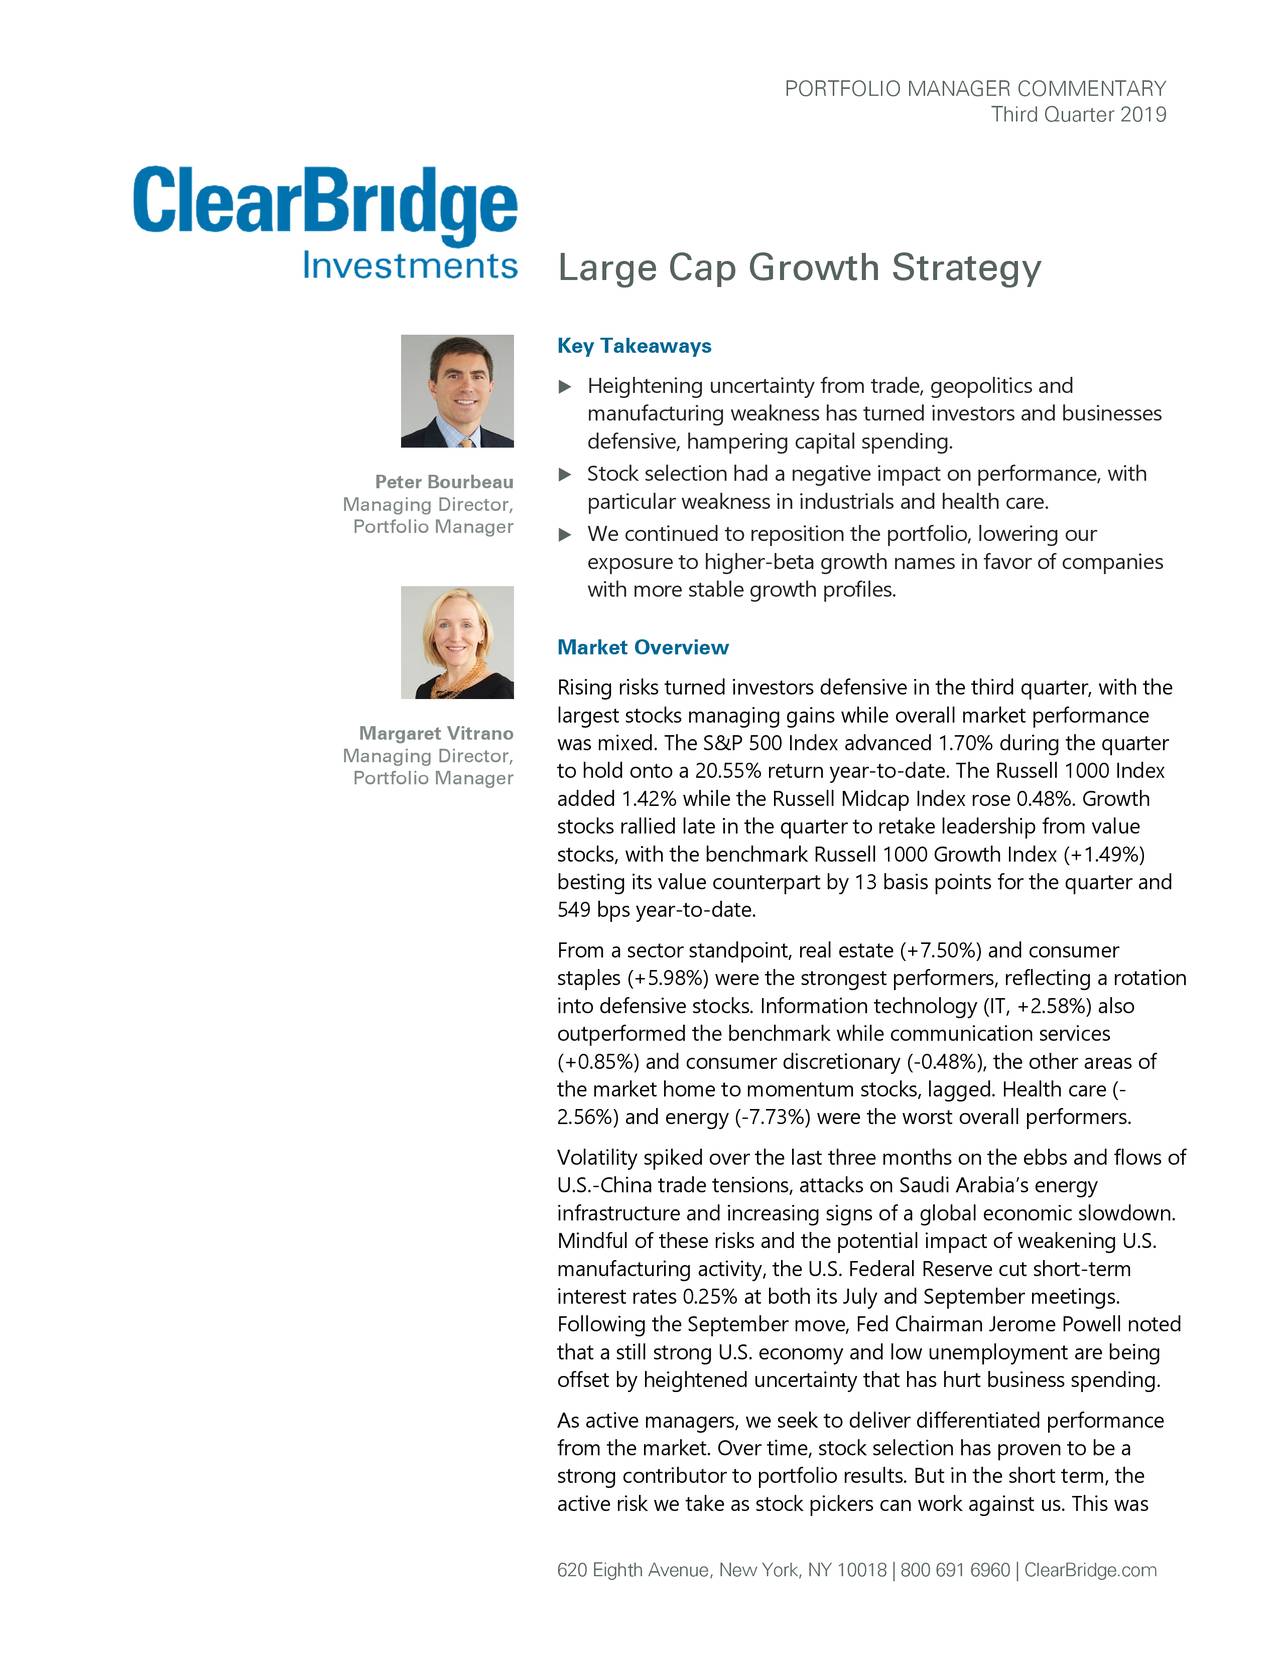 ClearBridge Large Cap Growth Strategy Portfolio Manager Commentary Q3 2019 | Seeking Alpha